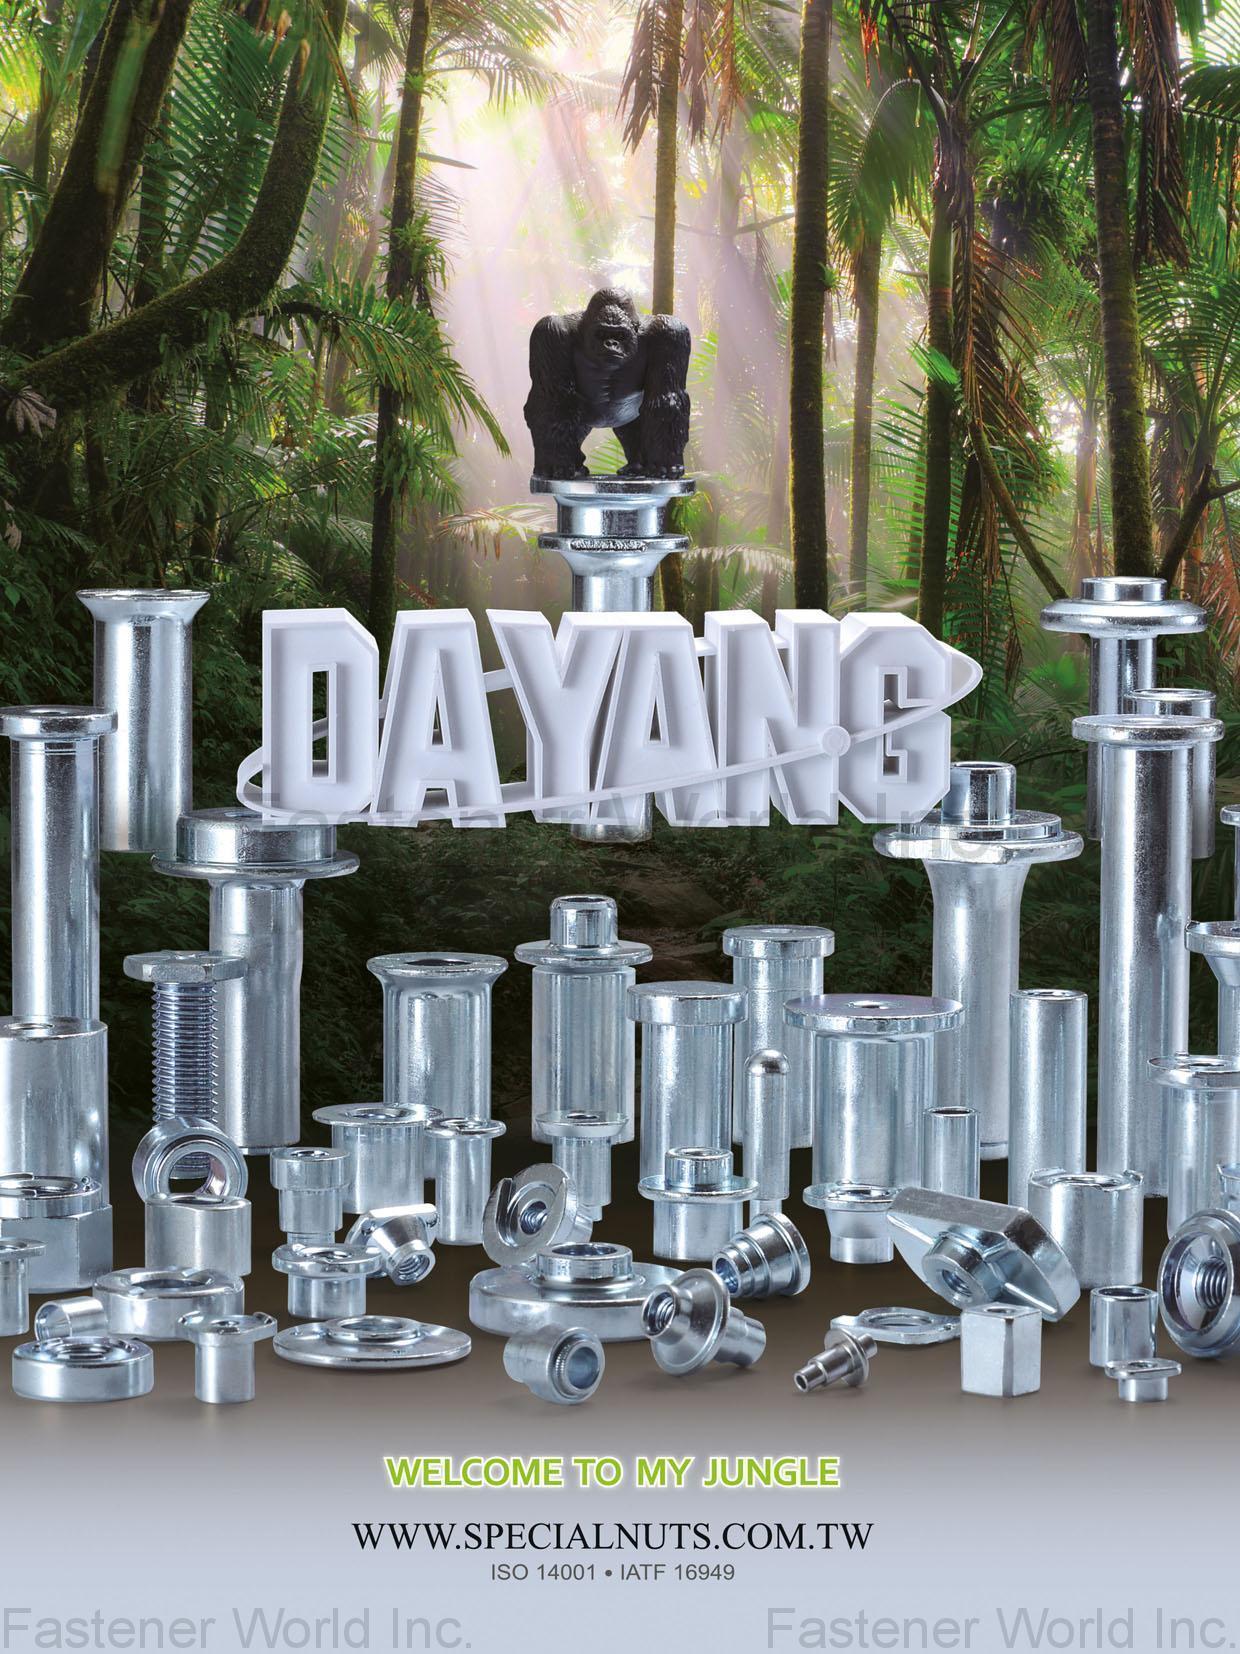 DA YANG SPECIAL NUTS , SPECIAL PARTS, WELD NUTS, T-NUTS, TUBES, SPECIAL RIVETS